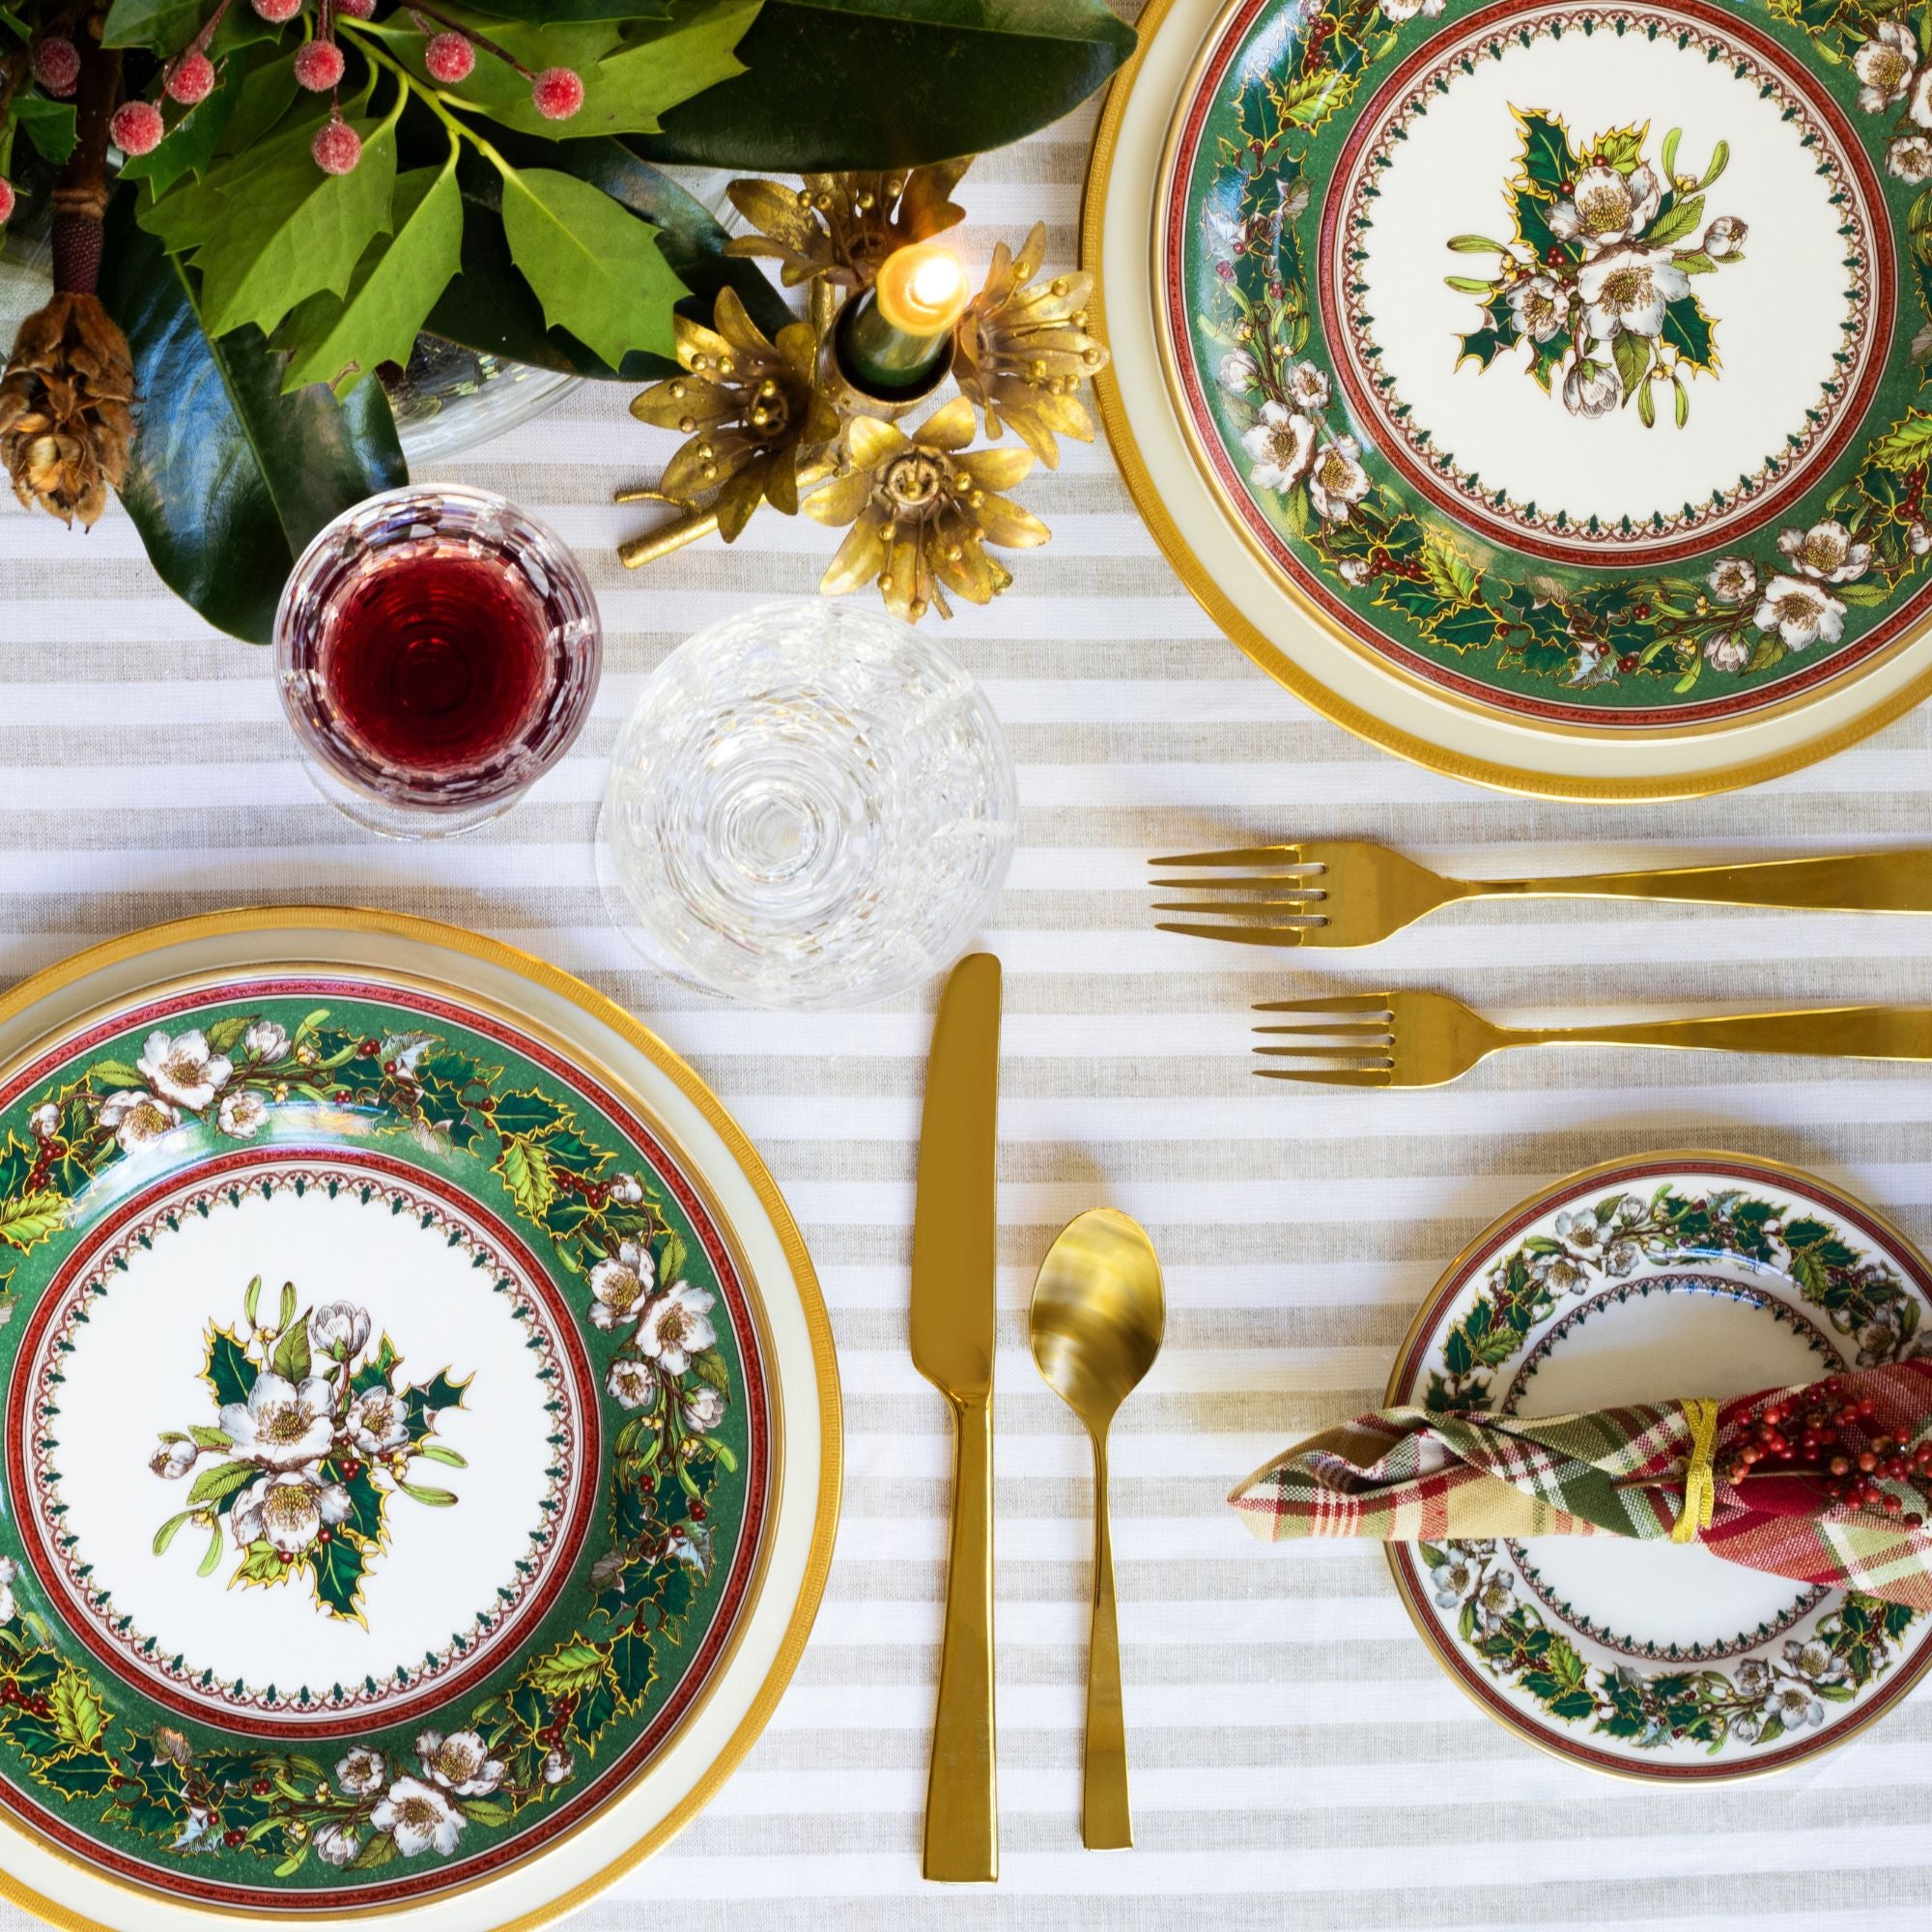 Holiday place setting with dinner plates featuring holly roses, gold luster flatware, and crystal.